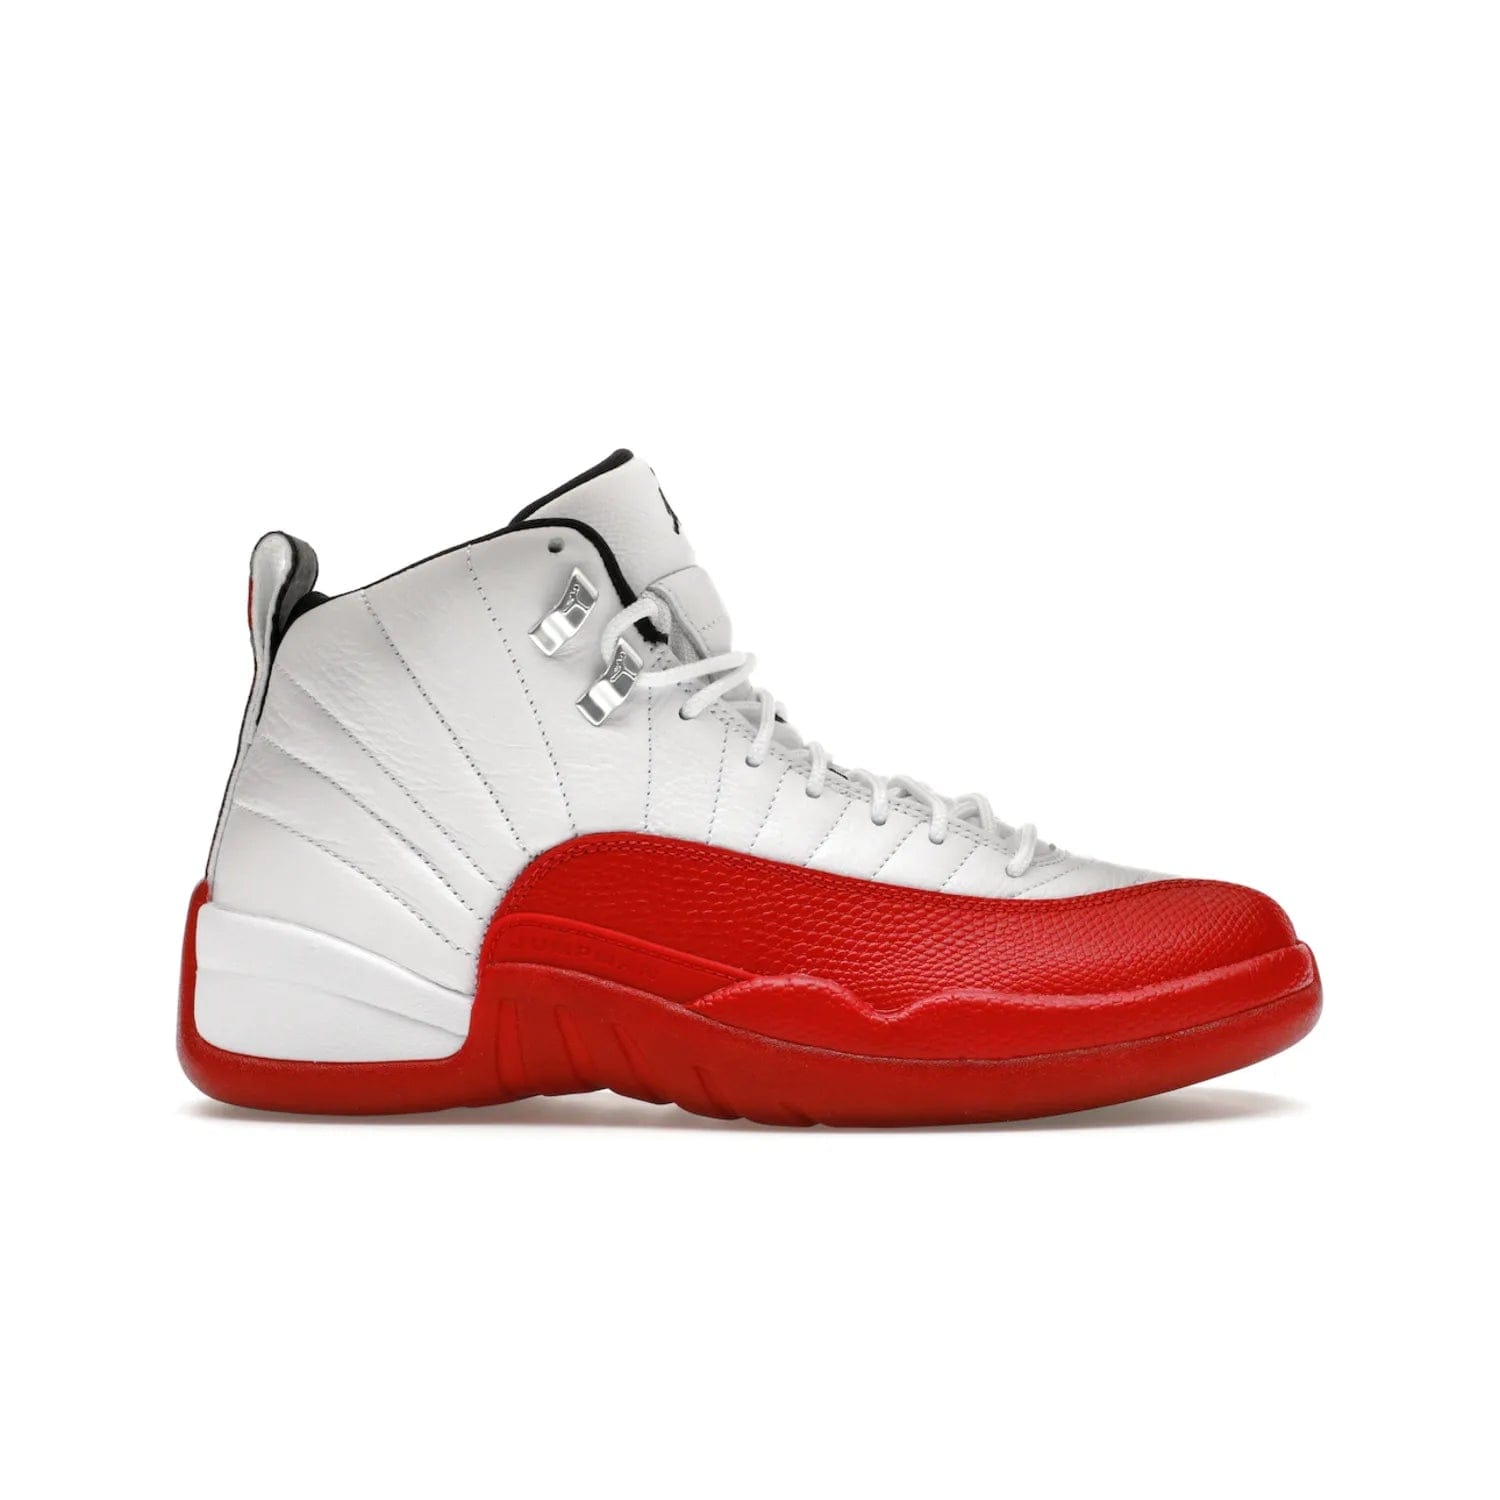 Jordan 12 Retro Cherry (2023) - Image 1 - Only at www.BallersClubKickz.com - Live your sneaker legend with the Jordan 12 Retro Cherry. Iconic pebbled leather mudguards, quilted uppers, and varsity red accents make this 1997 classic a must-have for 2023. Shine on with silver hardware and matching midsoles, and bring it all together for limited-edition style on October 28th. Step into Jordan legacy with the Retro Cherry.